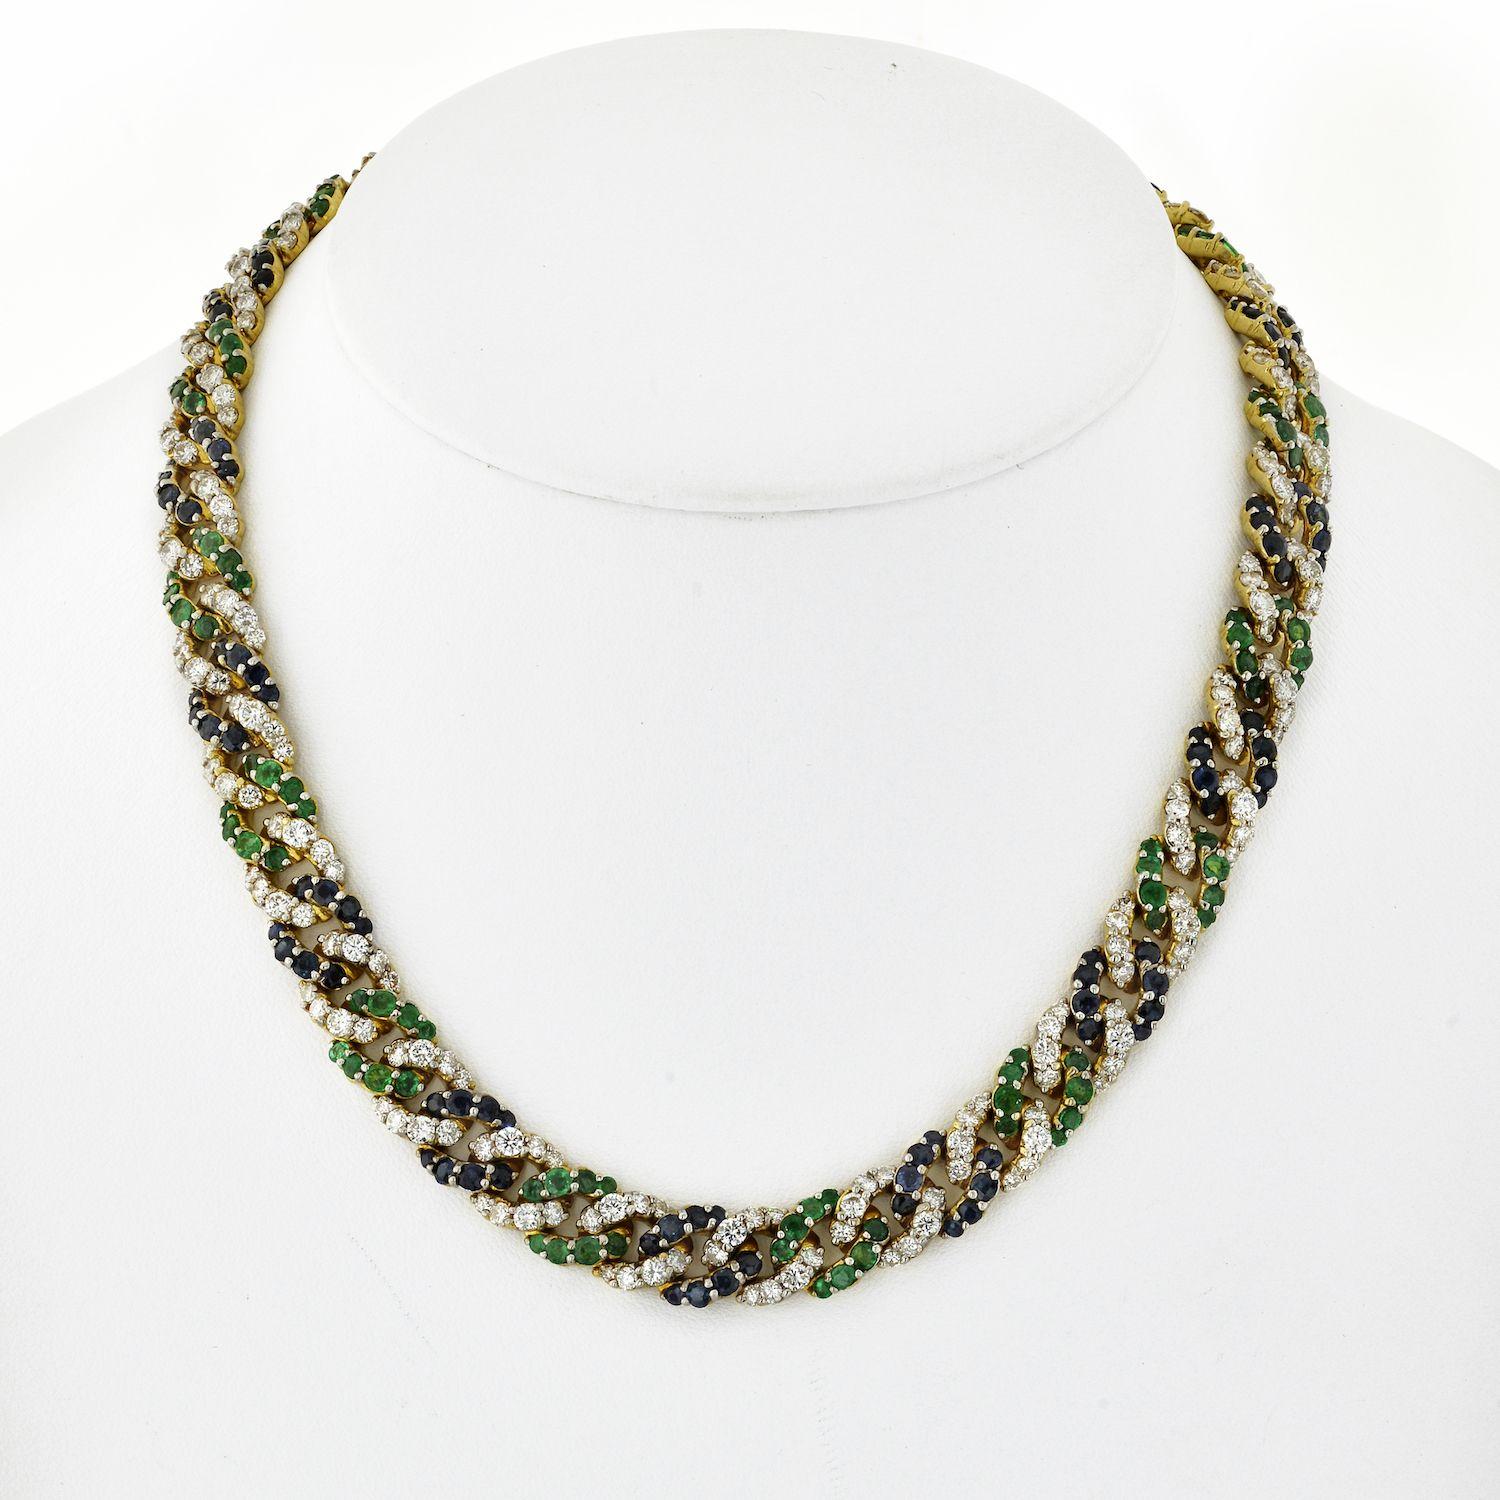 Cuban link color stone necklace. 
Mounted with diamonds, sapphires, and emeralds. 
18K Yellow Gold Cuban Link Diamond, Sapphire and Green Emerald Necklace.
16.5 inches. 100gr.